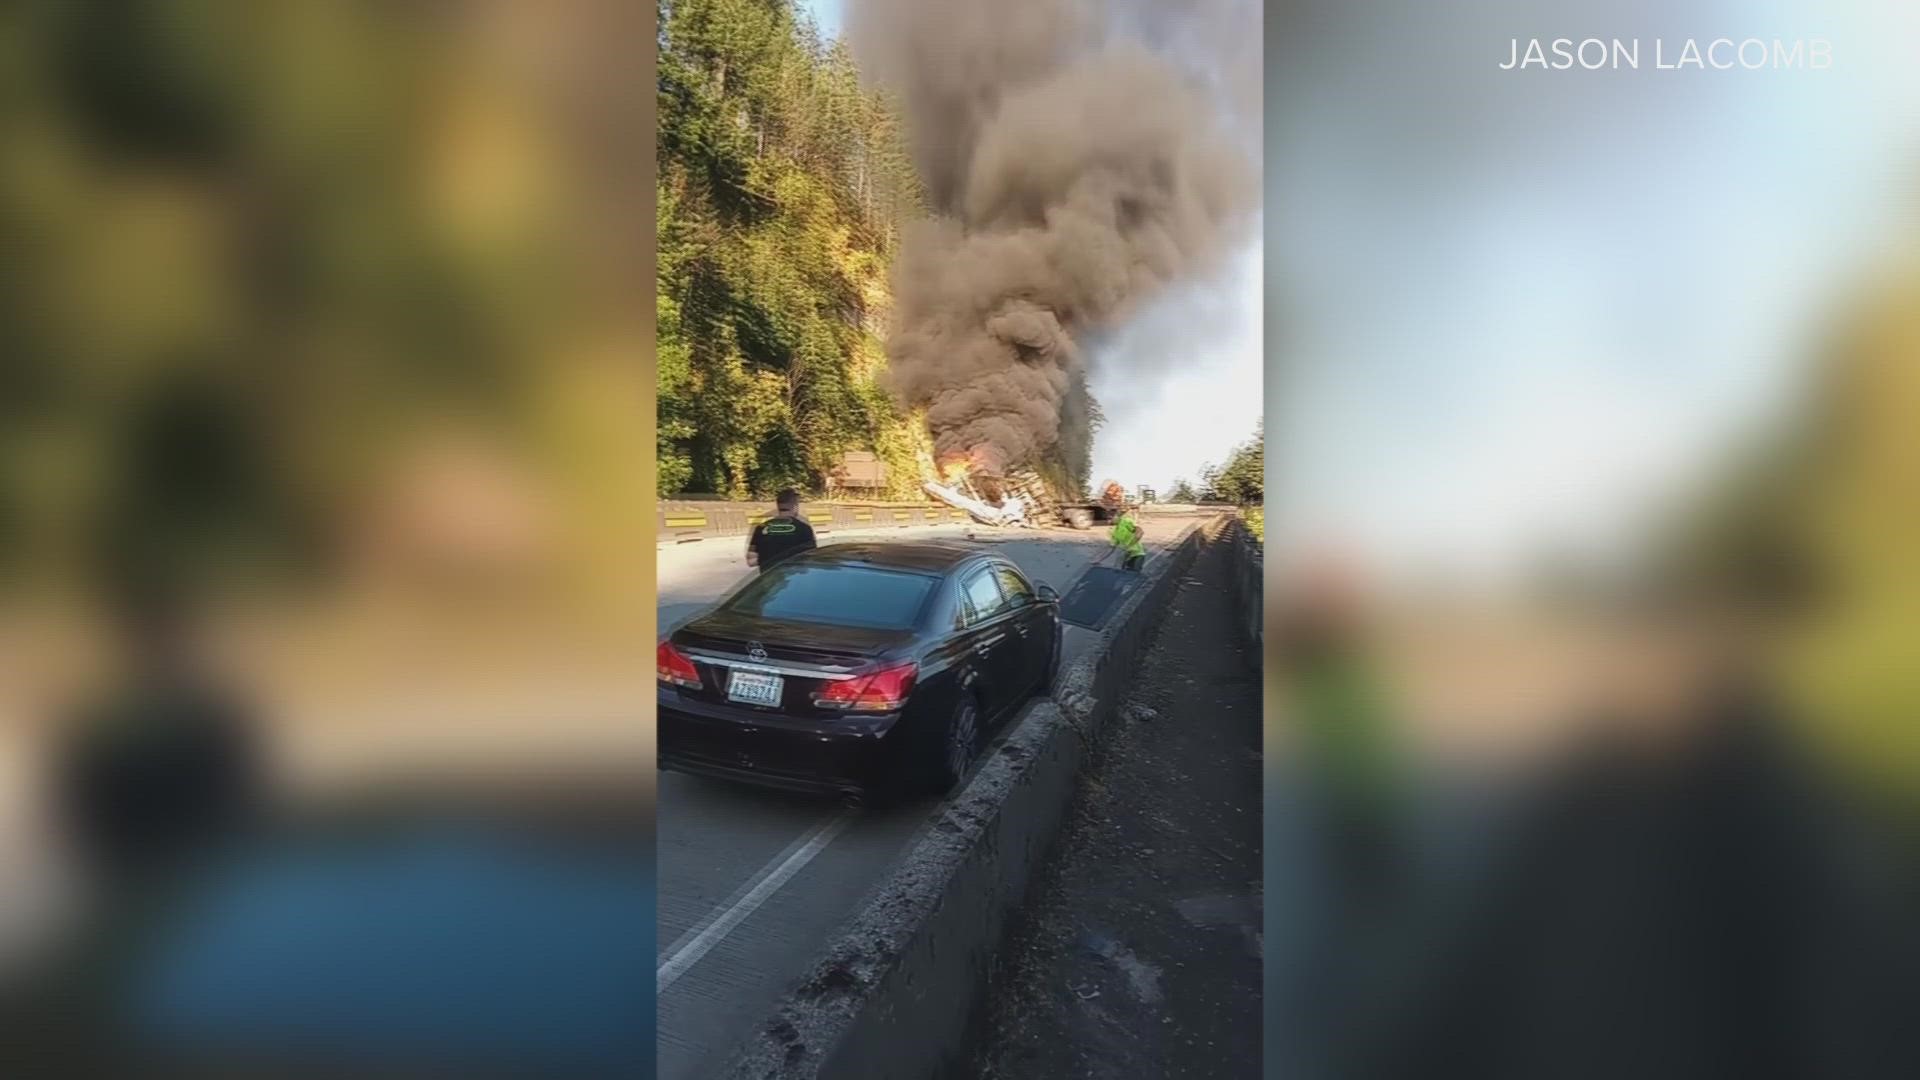 Jason LaComb captured video of the fire in the aftermath of the crash.